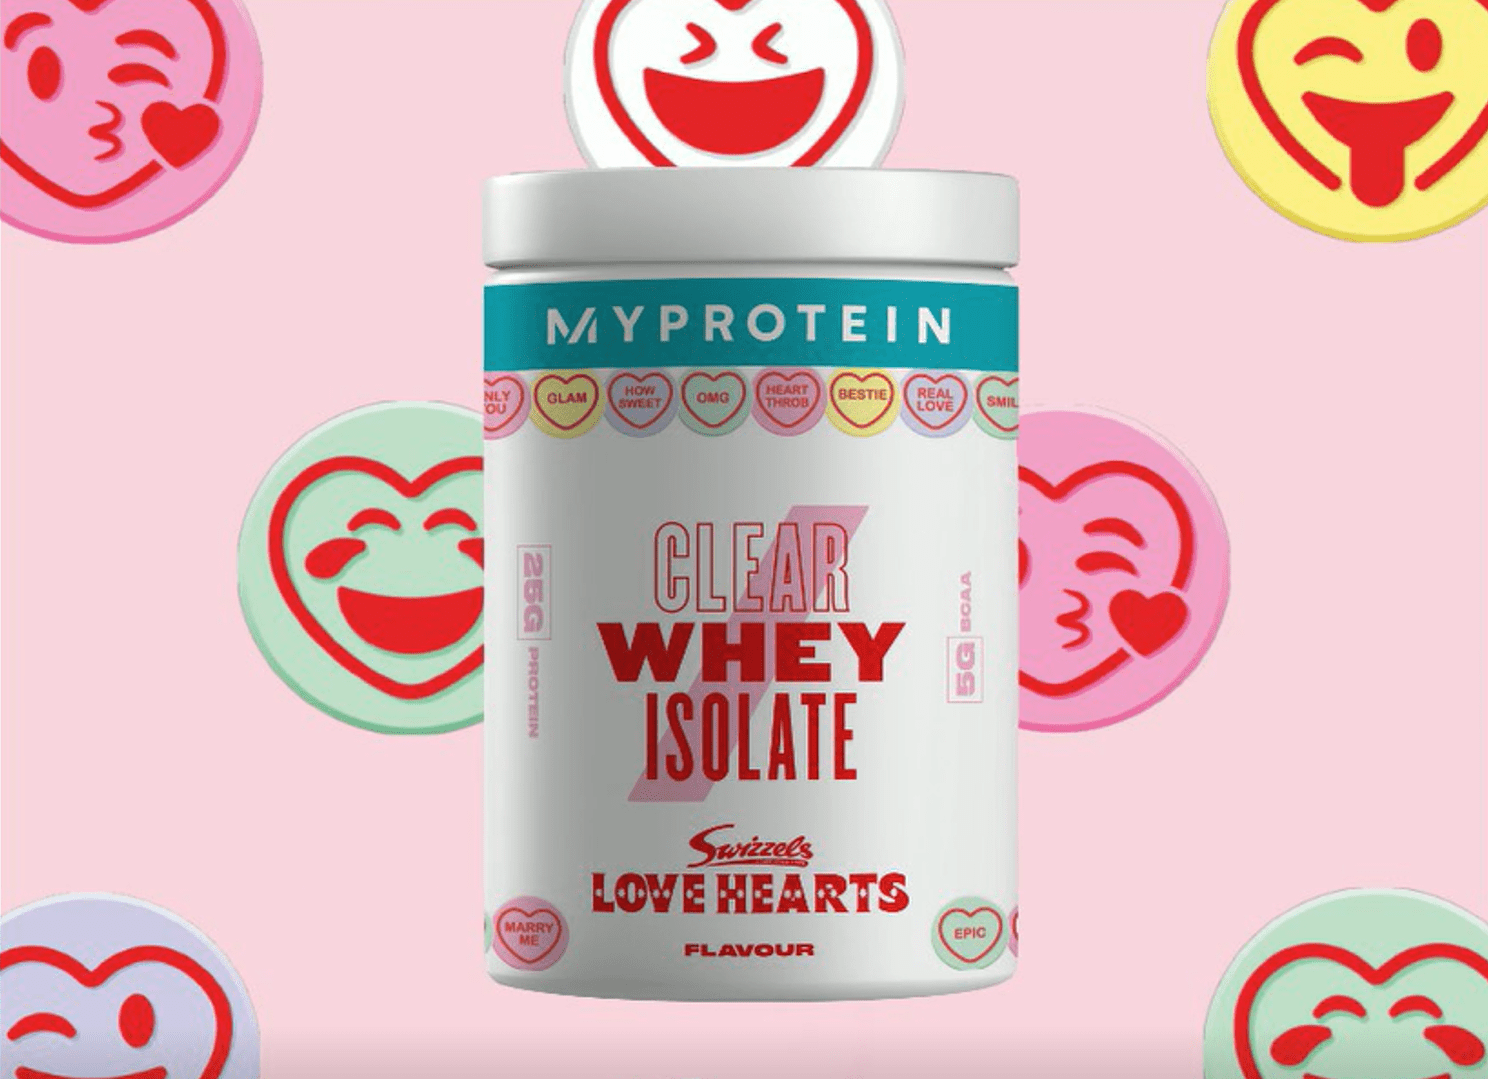 Clear whey isolate